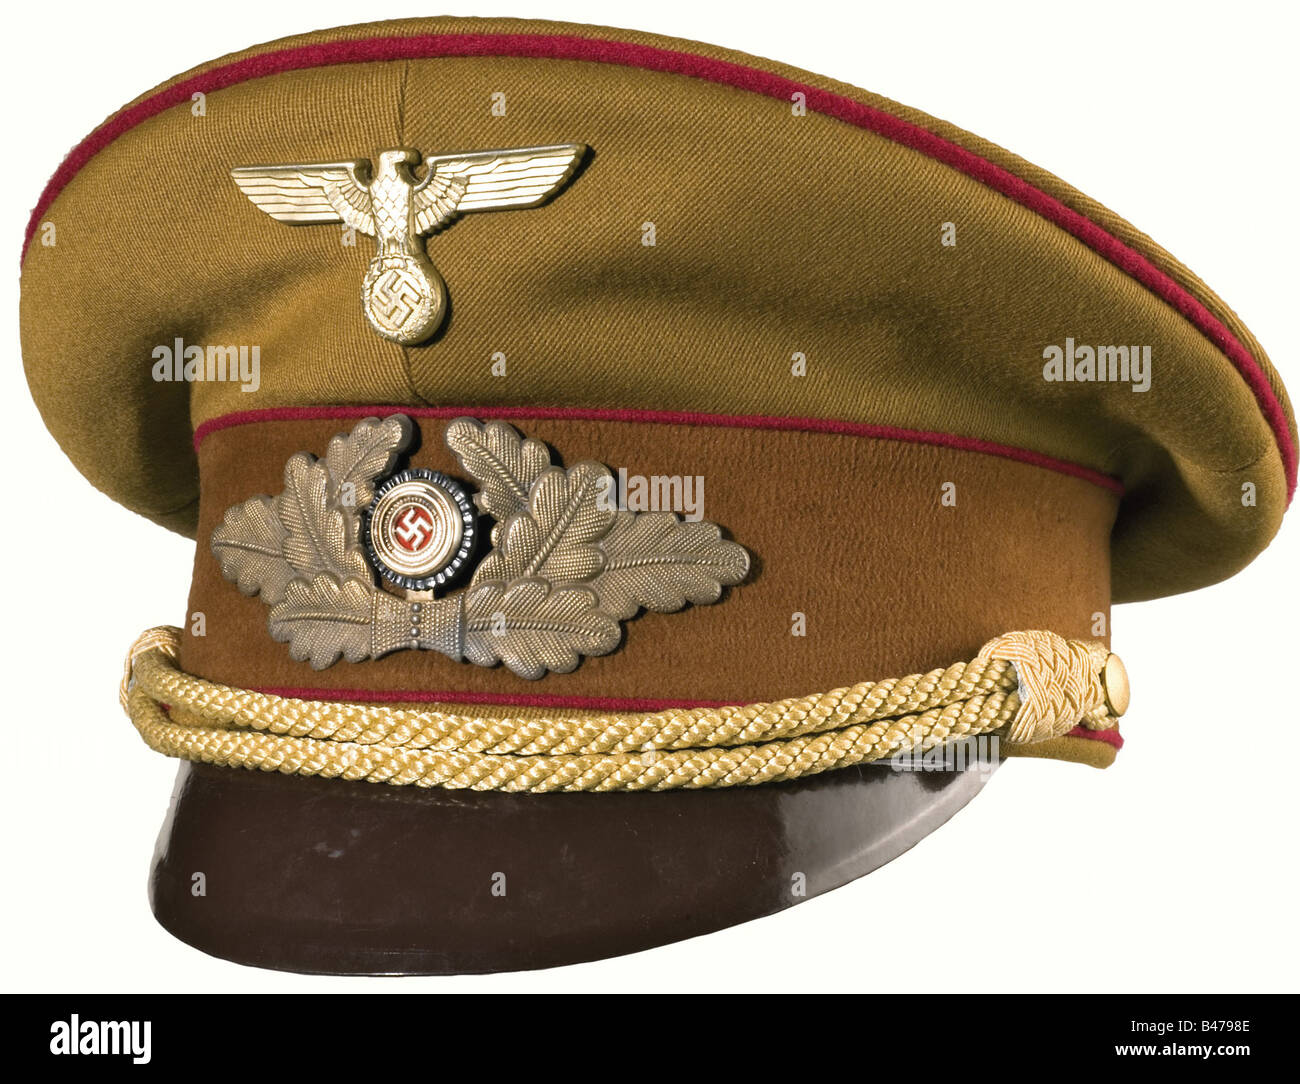 A service cap for political leaders, in the Gauleitung. Of light brown gabardine with a brown cap band and Bordeaux red piping, golden metal insignia, golden Cello cap cord, golden silk lining, and brown leather sweatband with the RZM label underneath. Size 56 1/2. historic, historical, 1930s, 1930s, 20th century, party organisation, party organization, organisations, organizations, organization, organisation, party, parties, political party, German, Germany, NS, National Socialism, Nazism, Third Reich, German Reich, utensil, piece of equipment, utensils, objec, Stock Photo